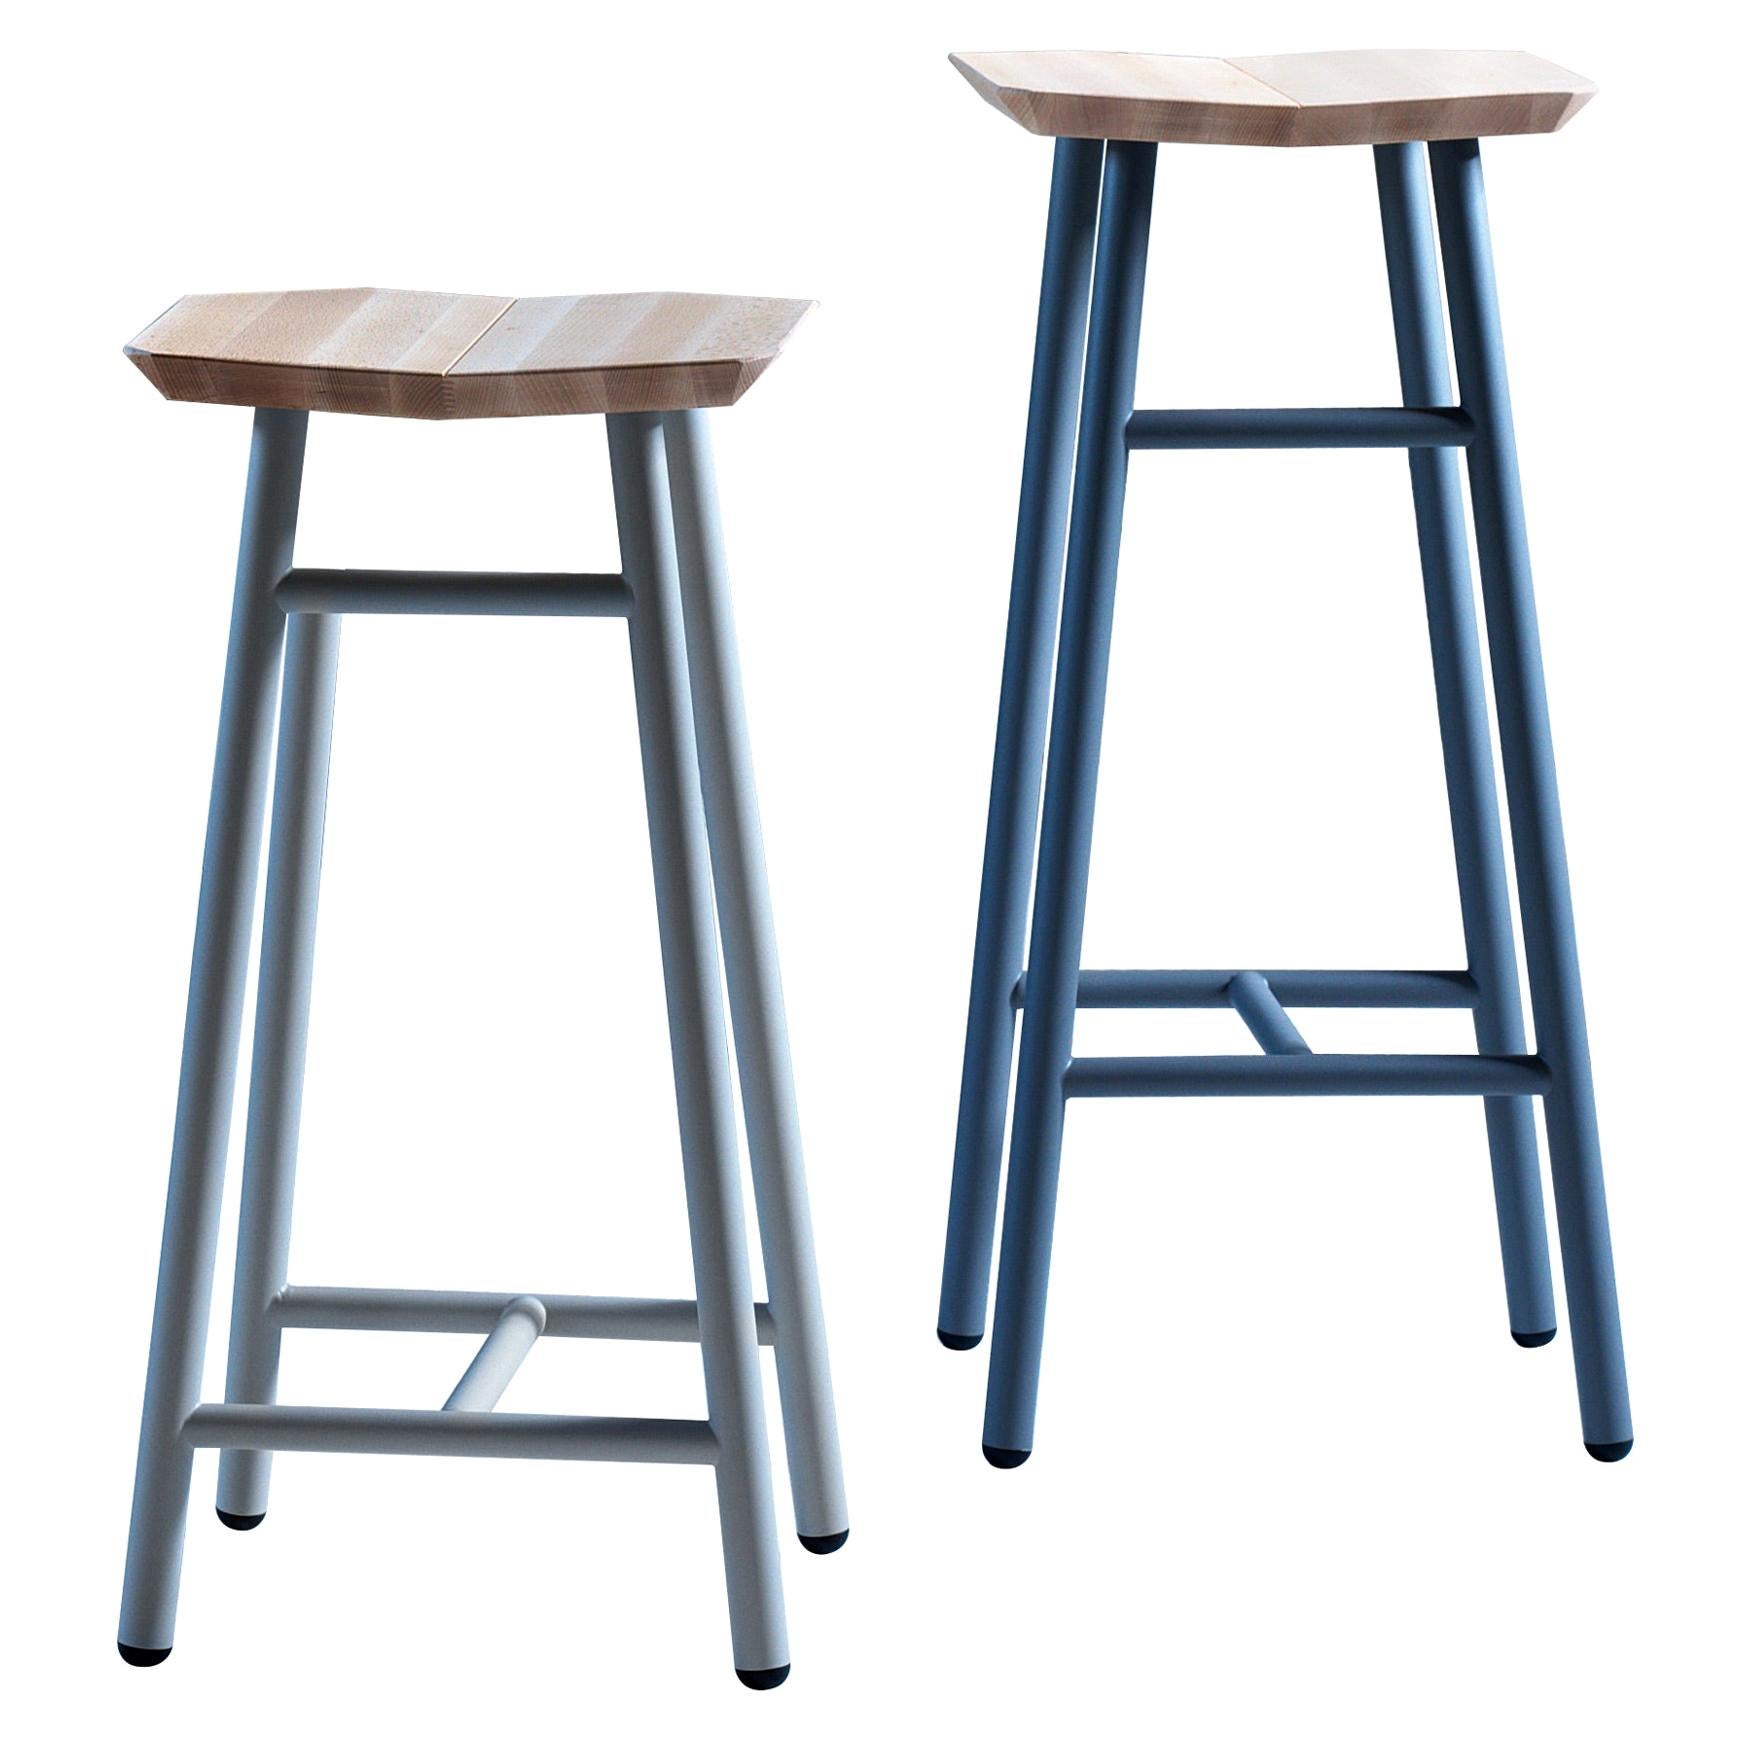 For Sale: Blue (Intense Blue Lacquer) Dedo High Stool in Steel Lacquer Legs, Wooden Seat, by Miniforms Lab 2